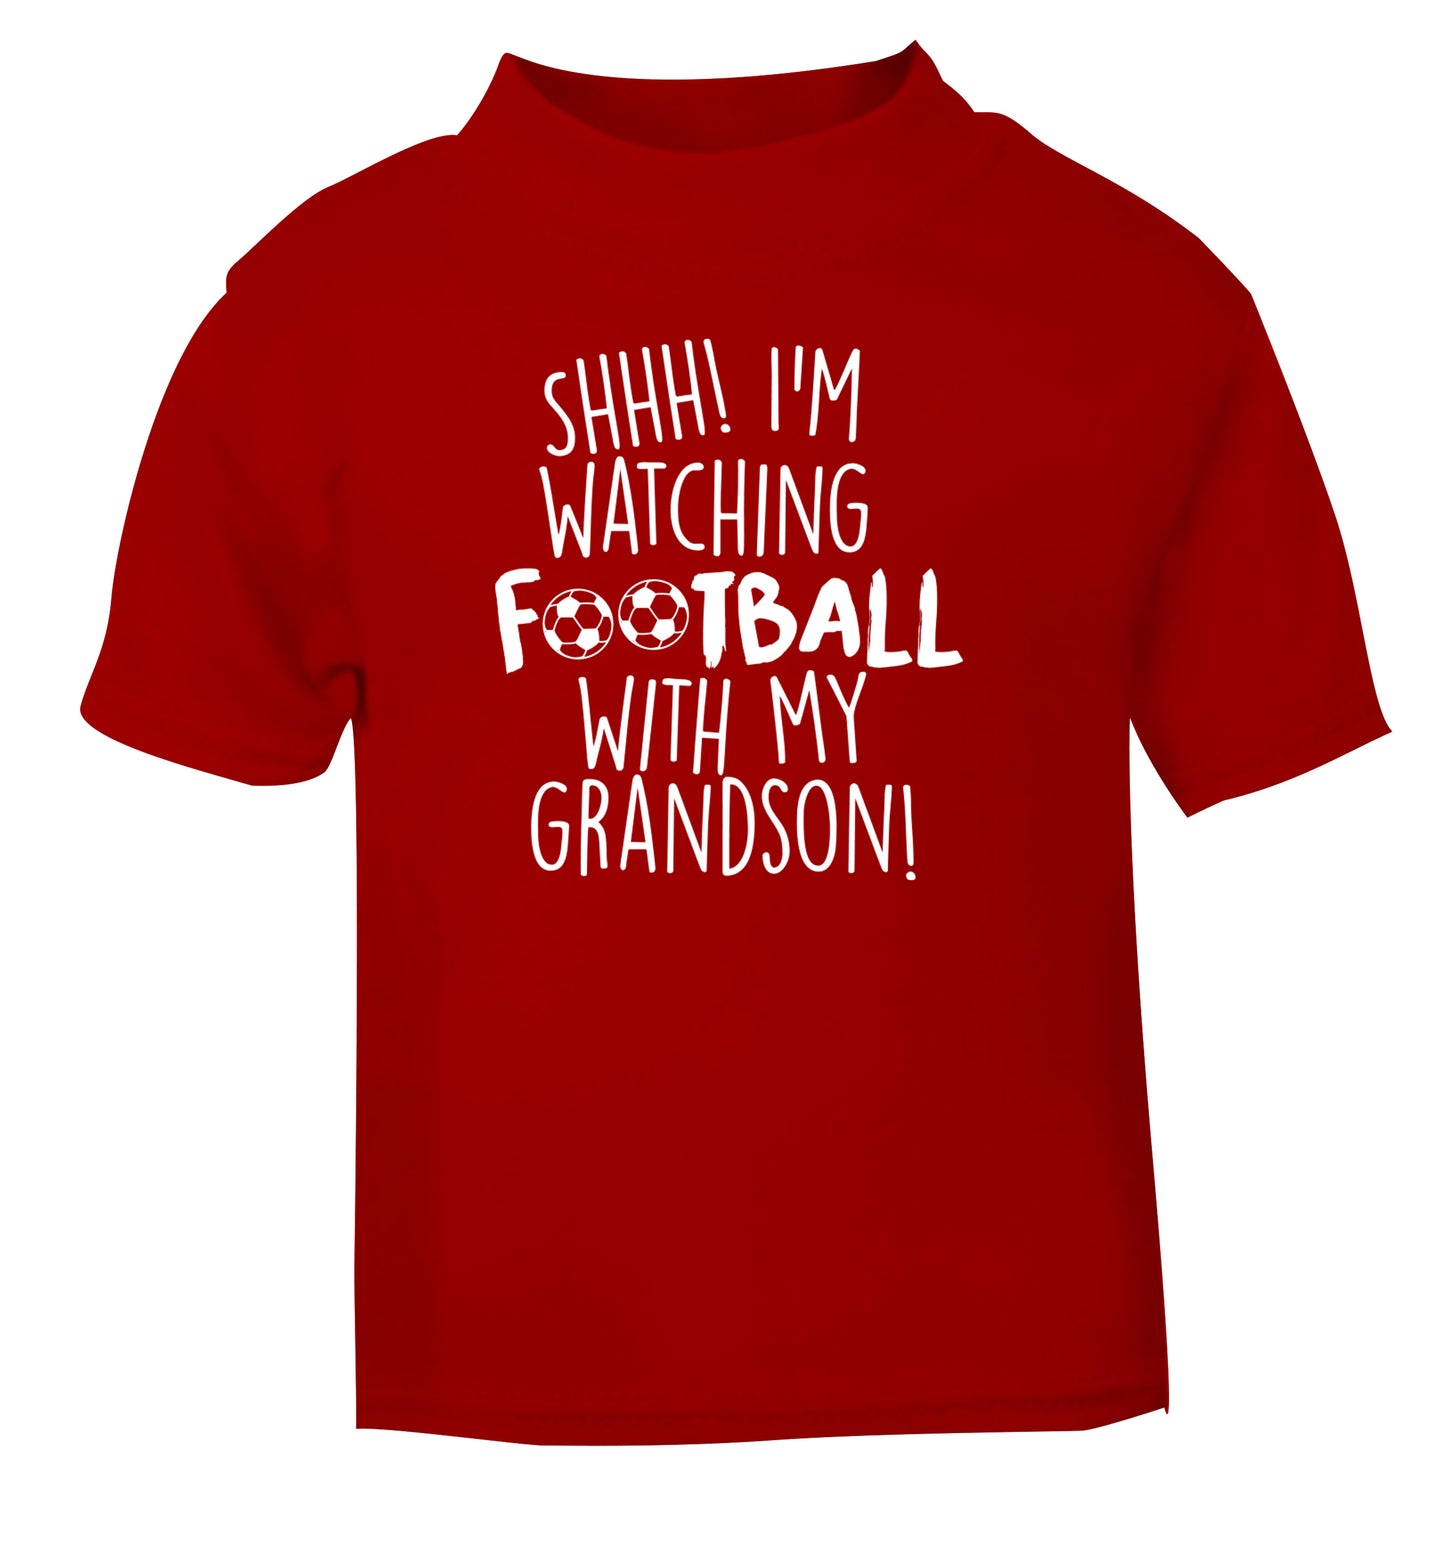 Shhh I'm watching football with my grandson red Baby Toddler Tshirt 2 Years